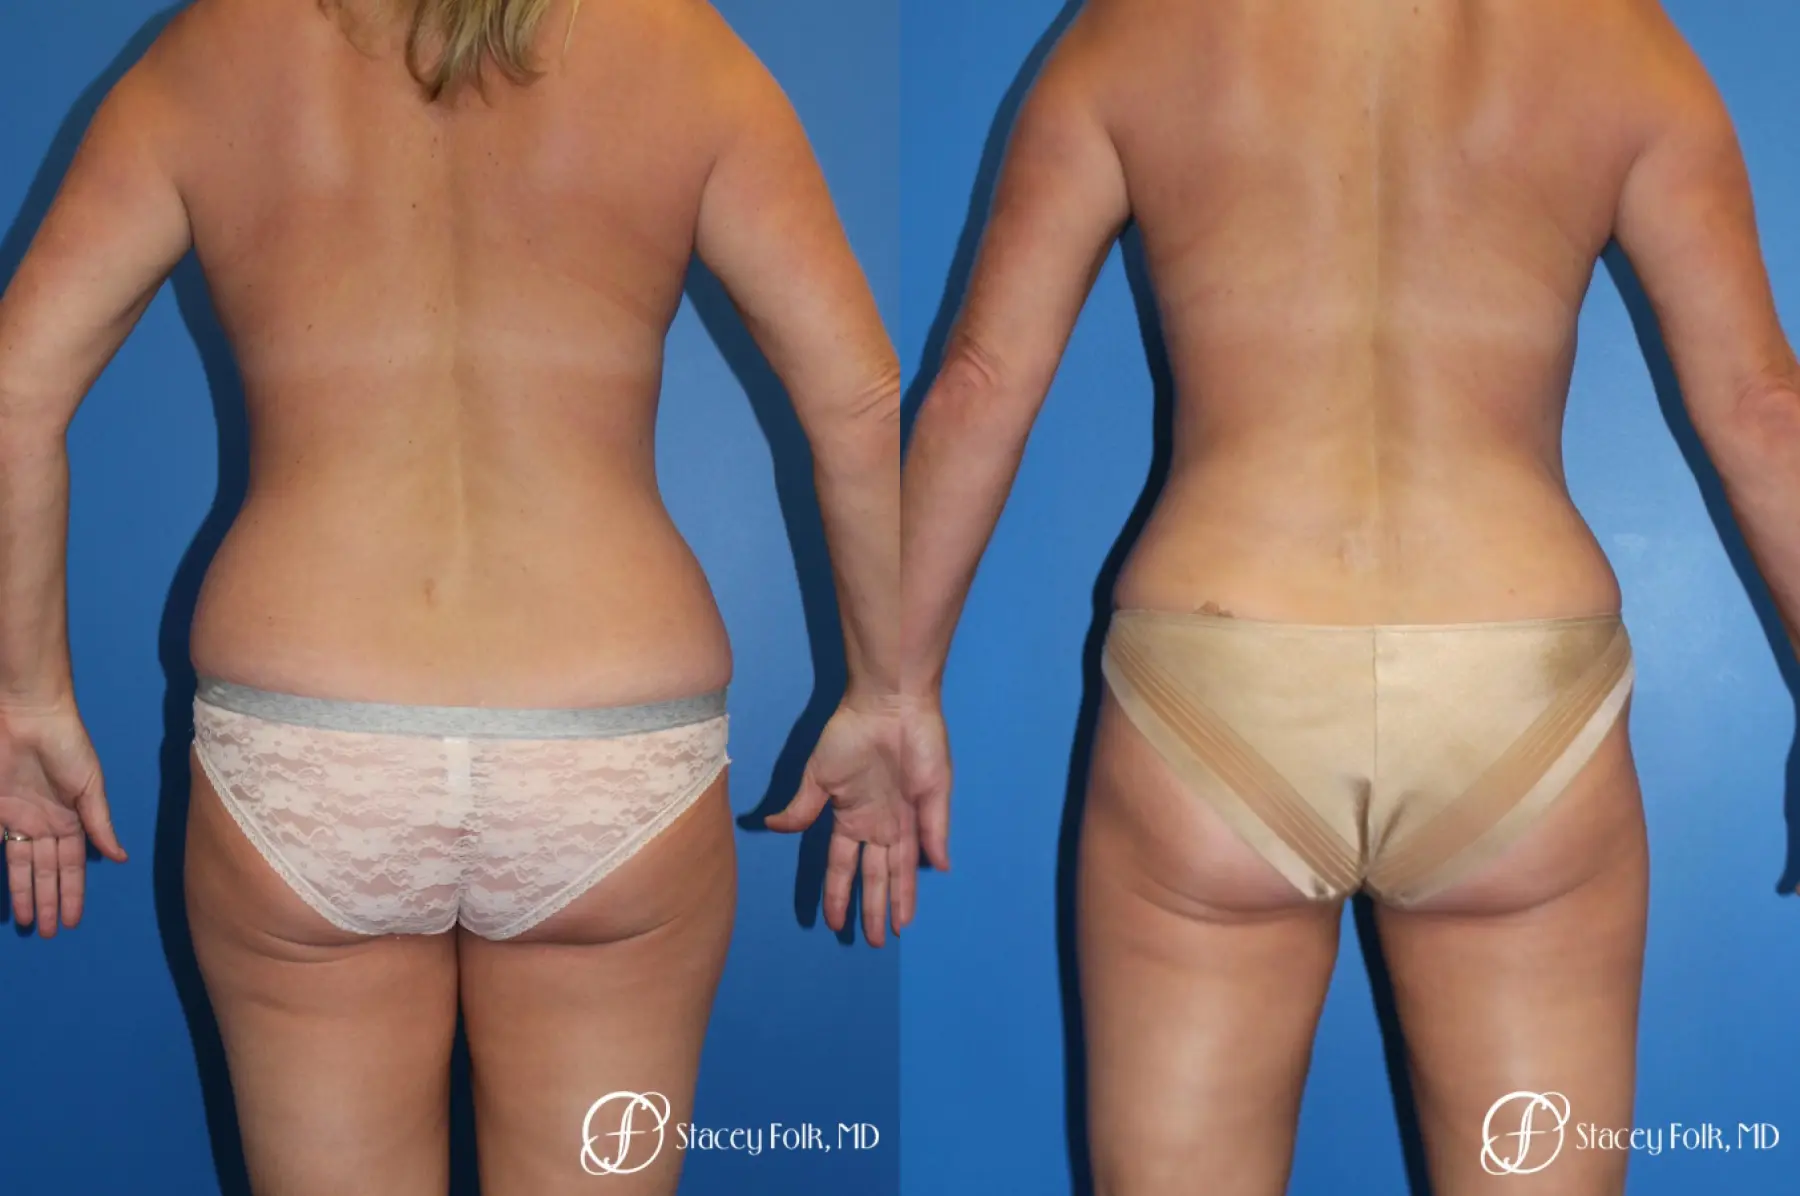 Liposuction Before & After Gallery: Patient 3